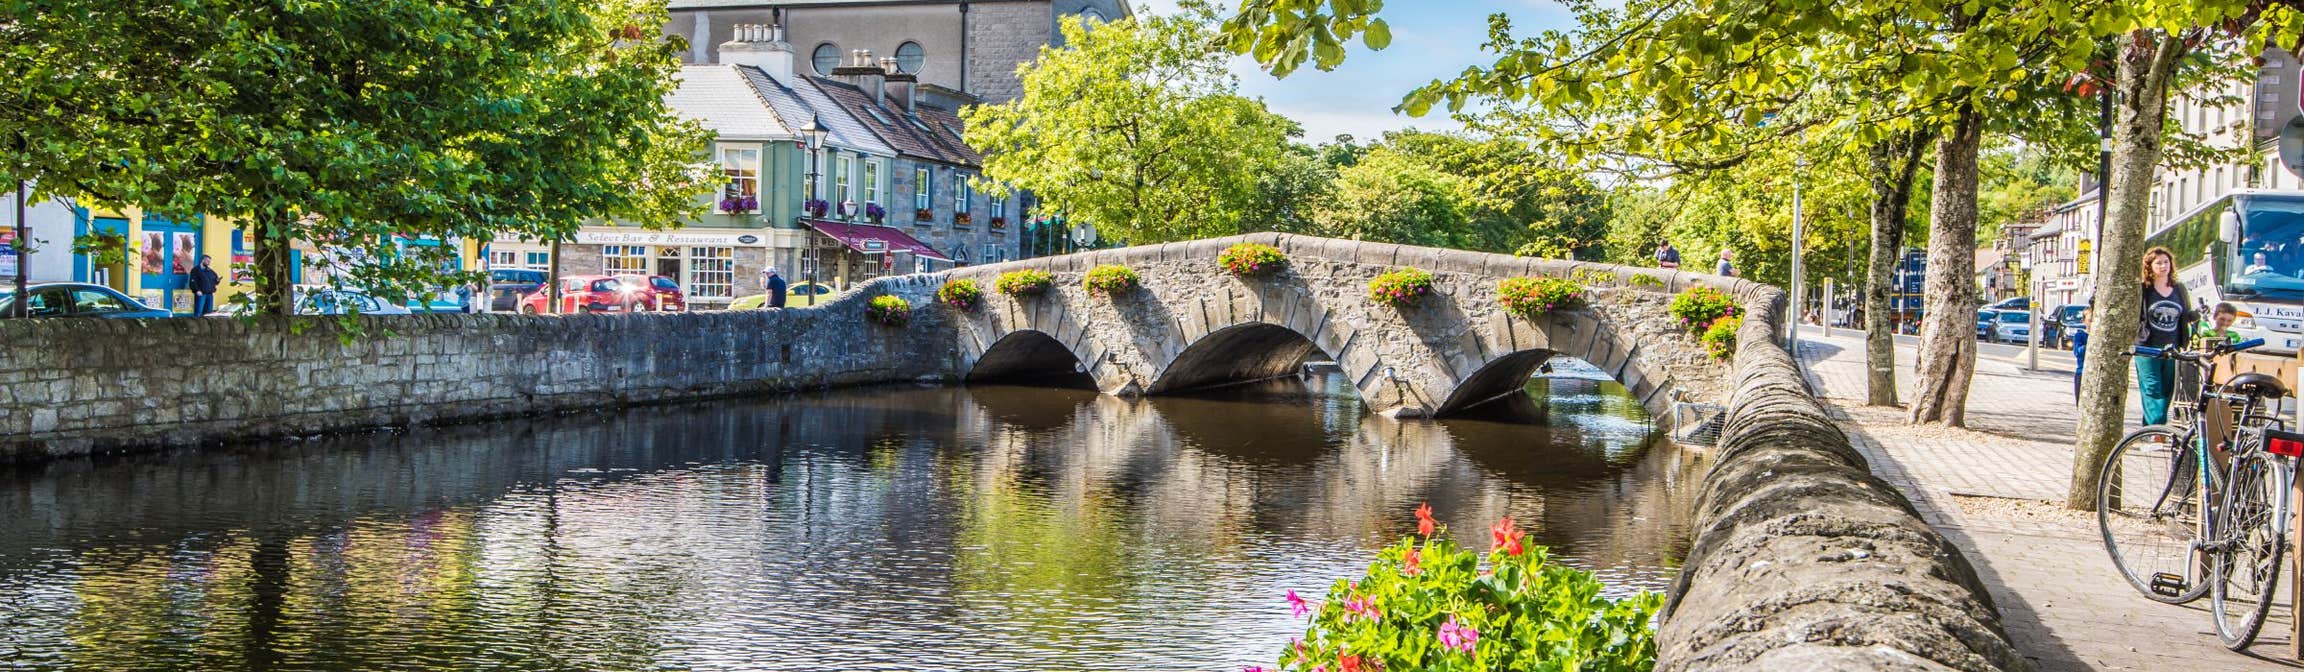 Green trees hanging over a river in Westport Town, Mayo